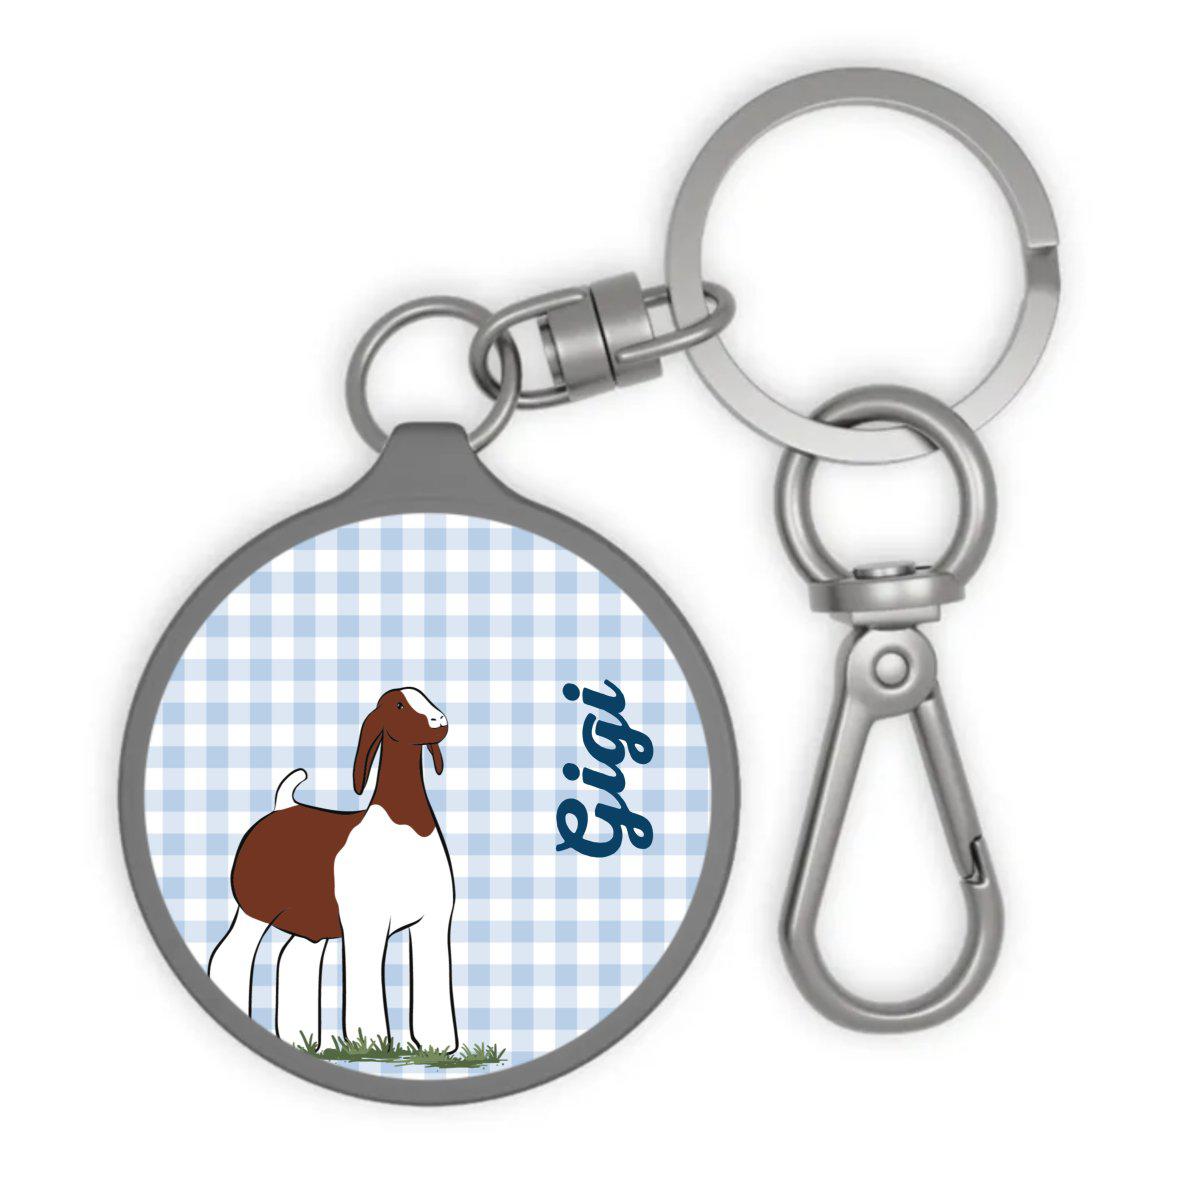 Personalized-Livestock-Key Chain Tag - Gingham Design